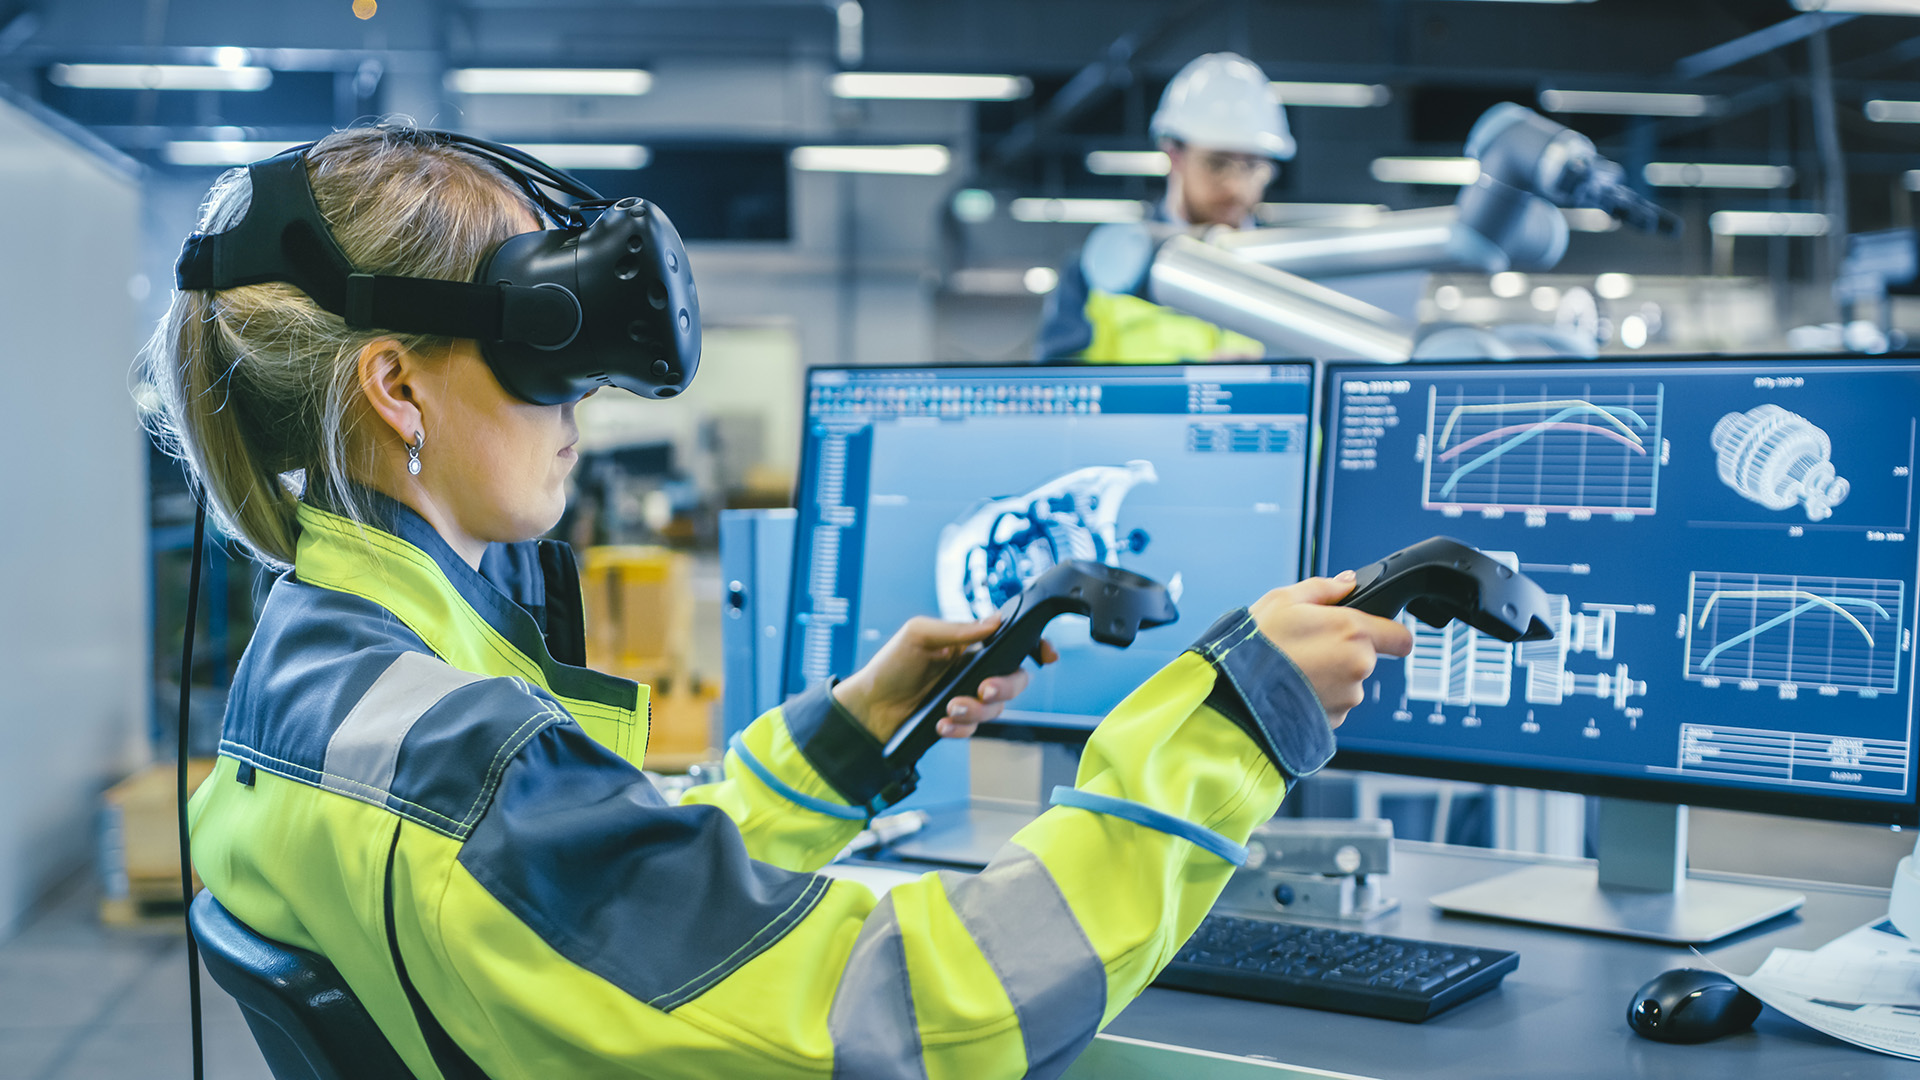 female factory worker wearing a vr headset and holding controllers for an industrial training application in an enterprise setting